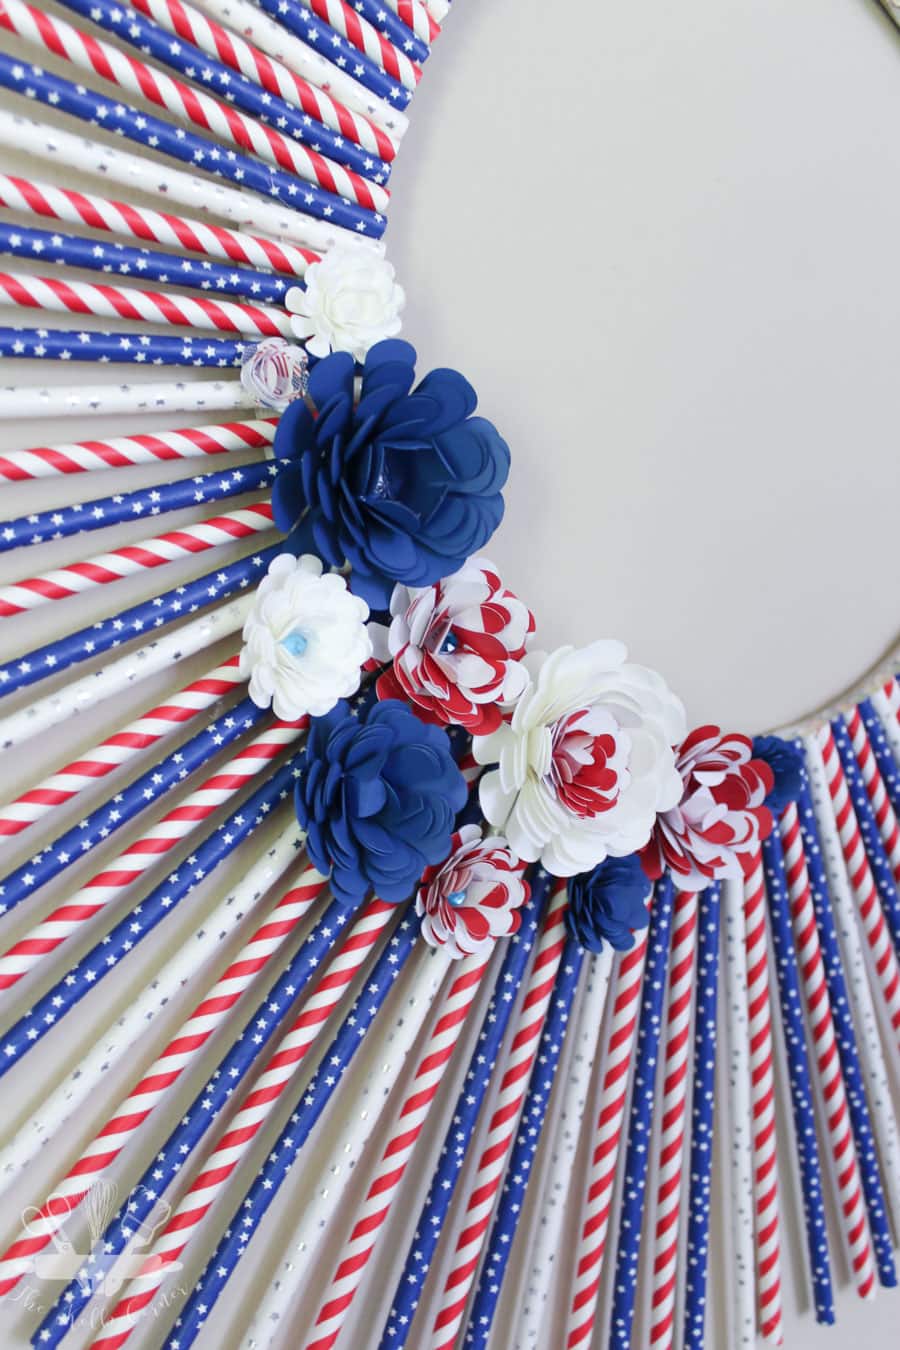 Make your own patriotic straw wreath with this quick tutorial